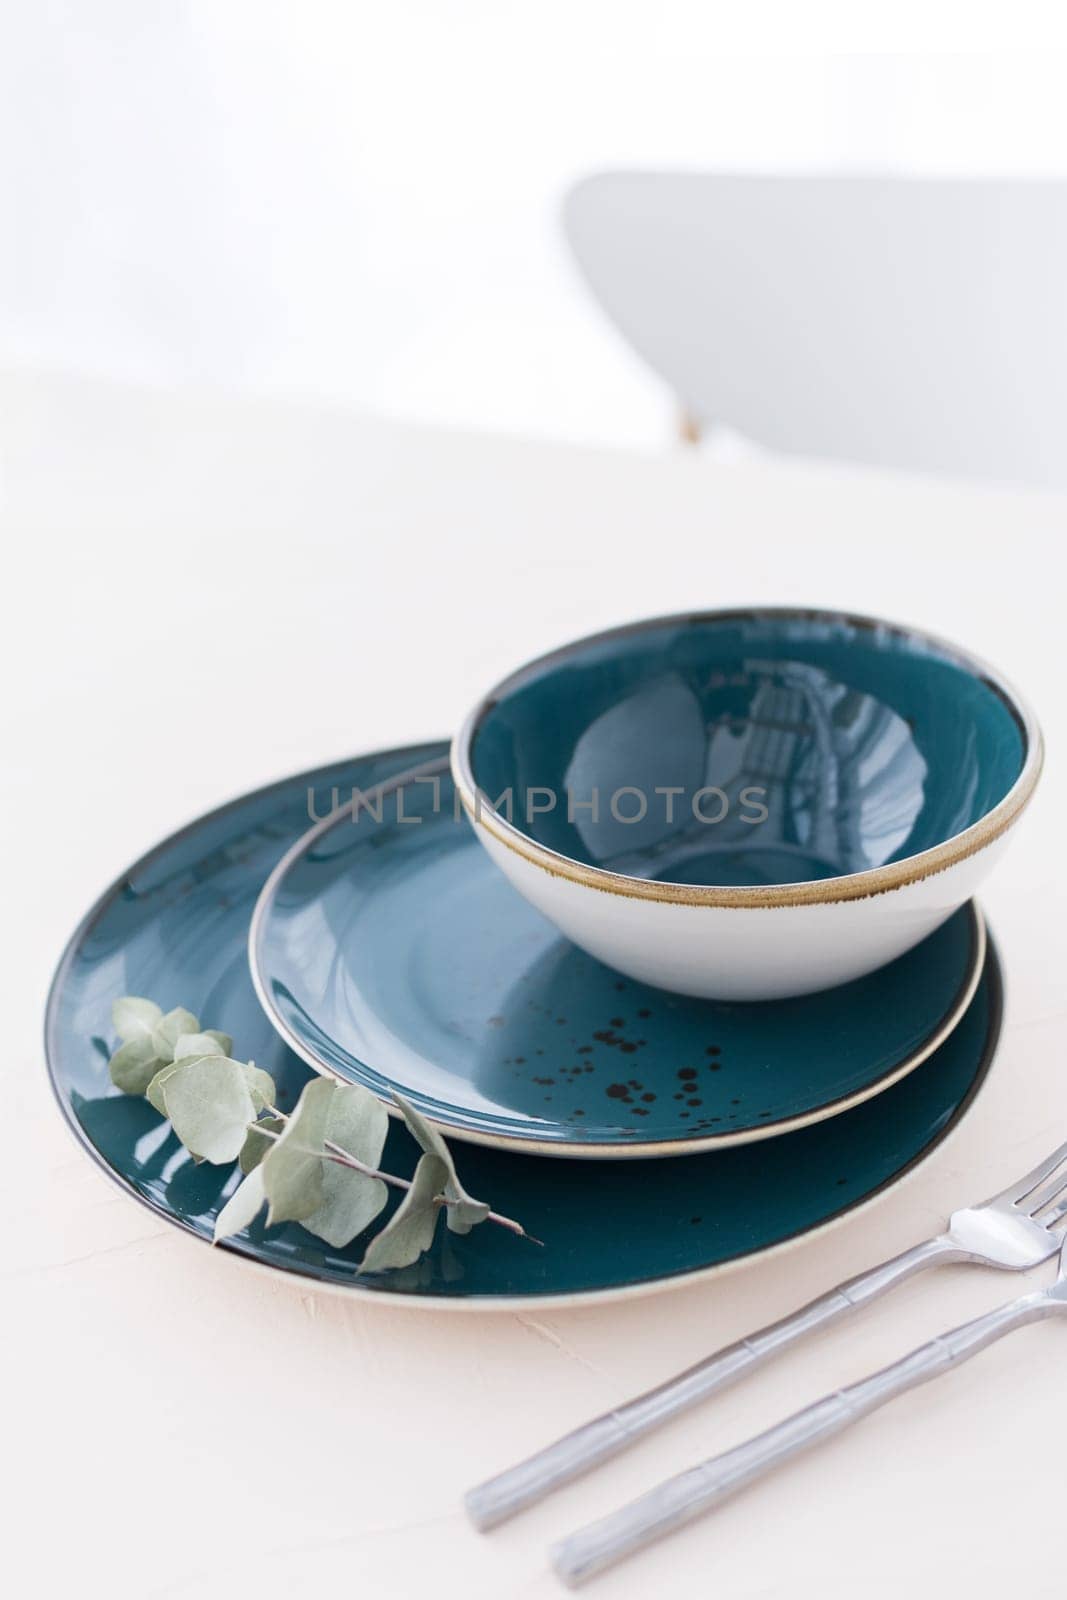 Three empty green plates with silver cutlery on white table in front of window by dmitryz